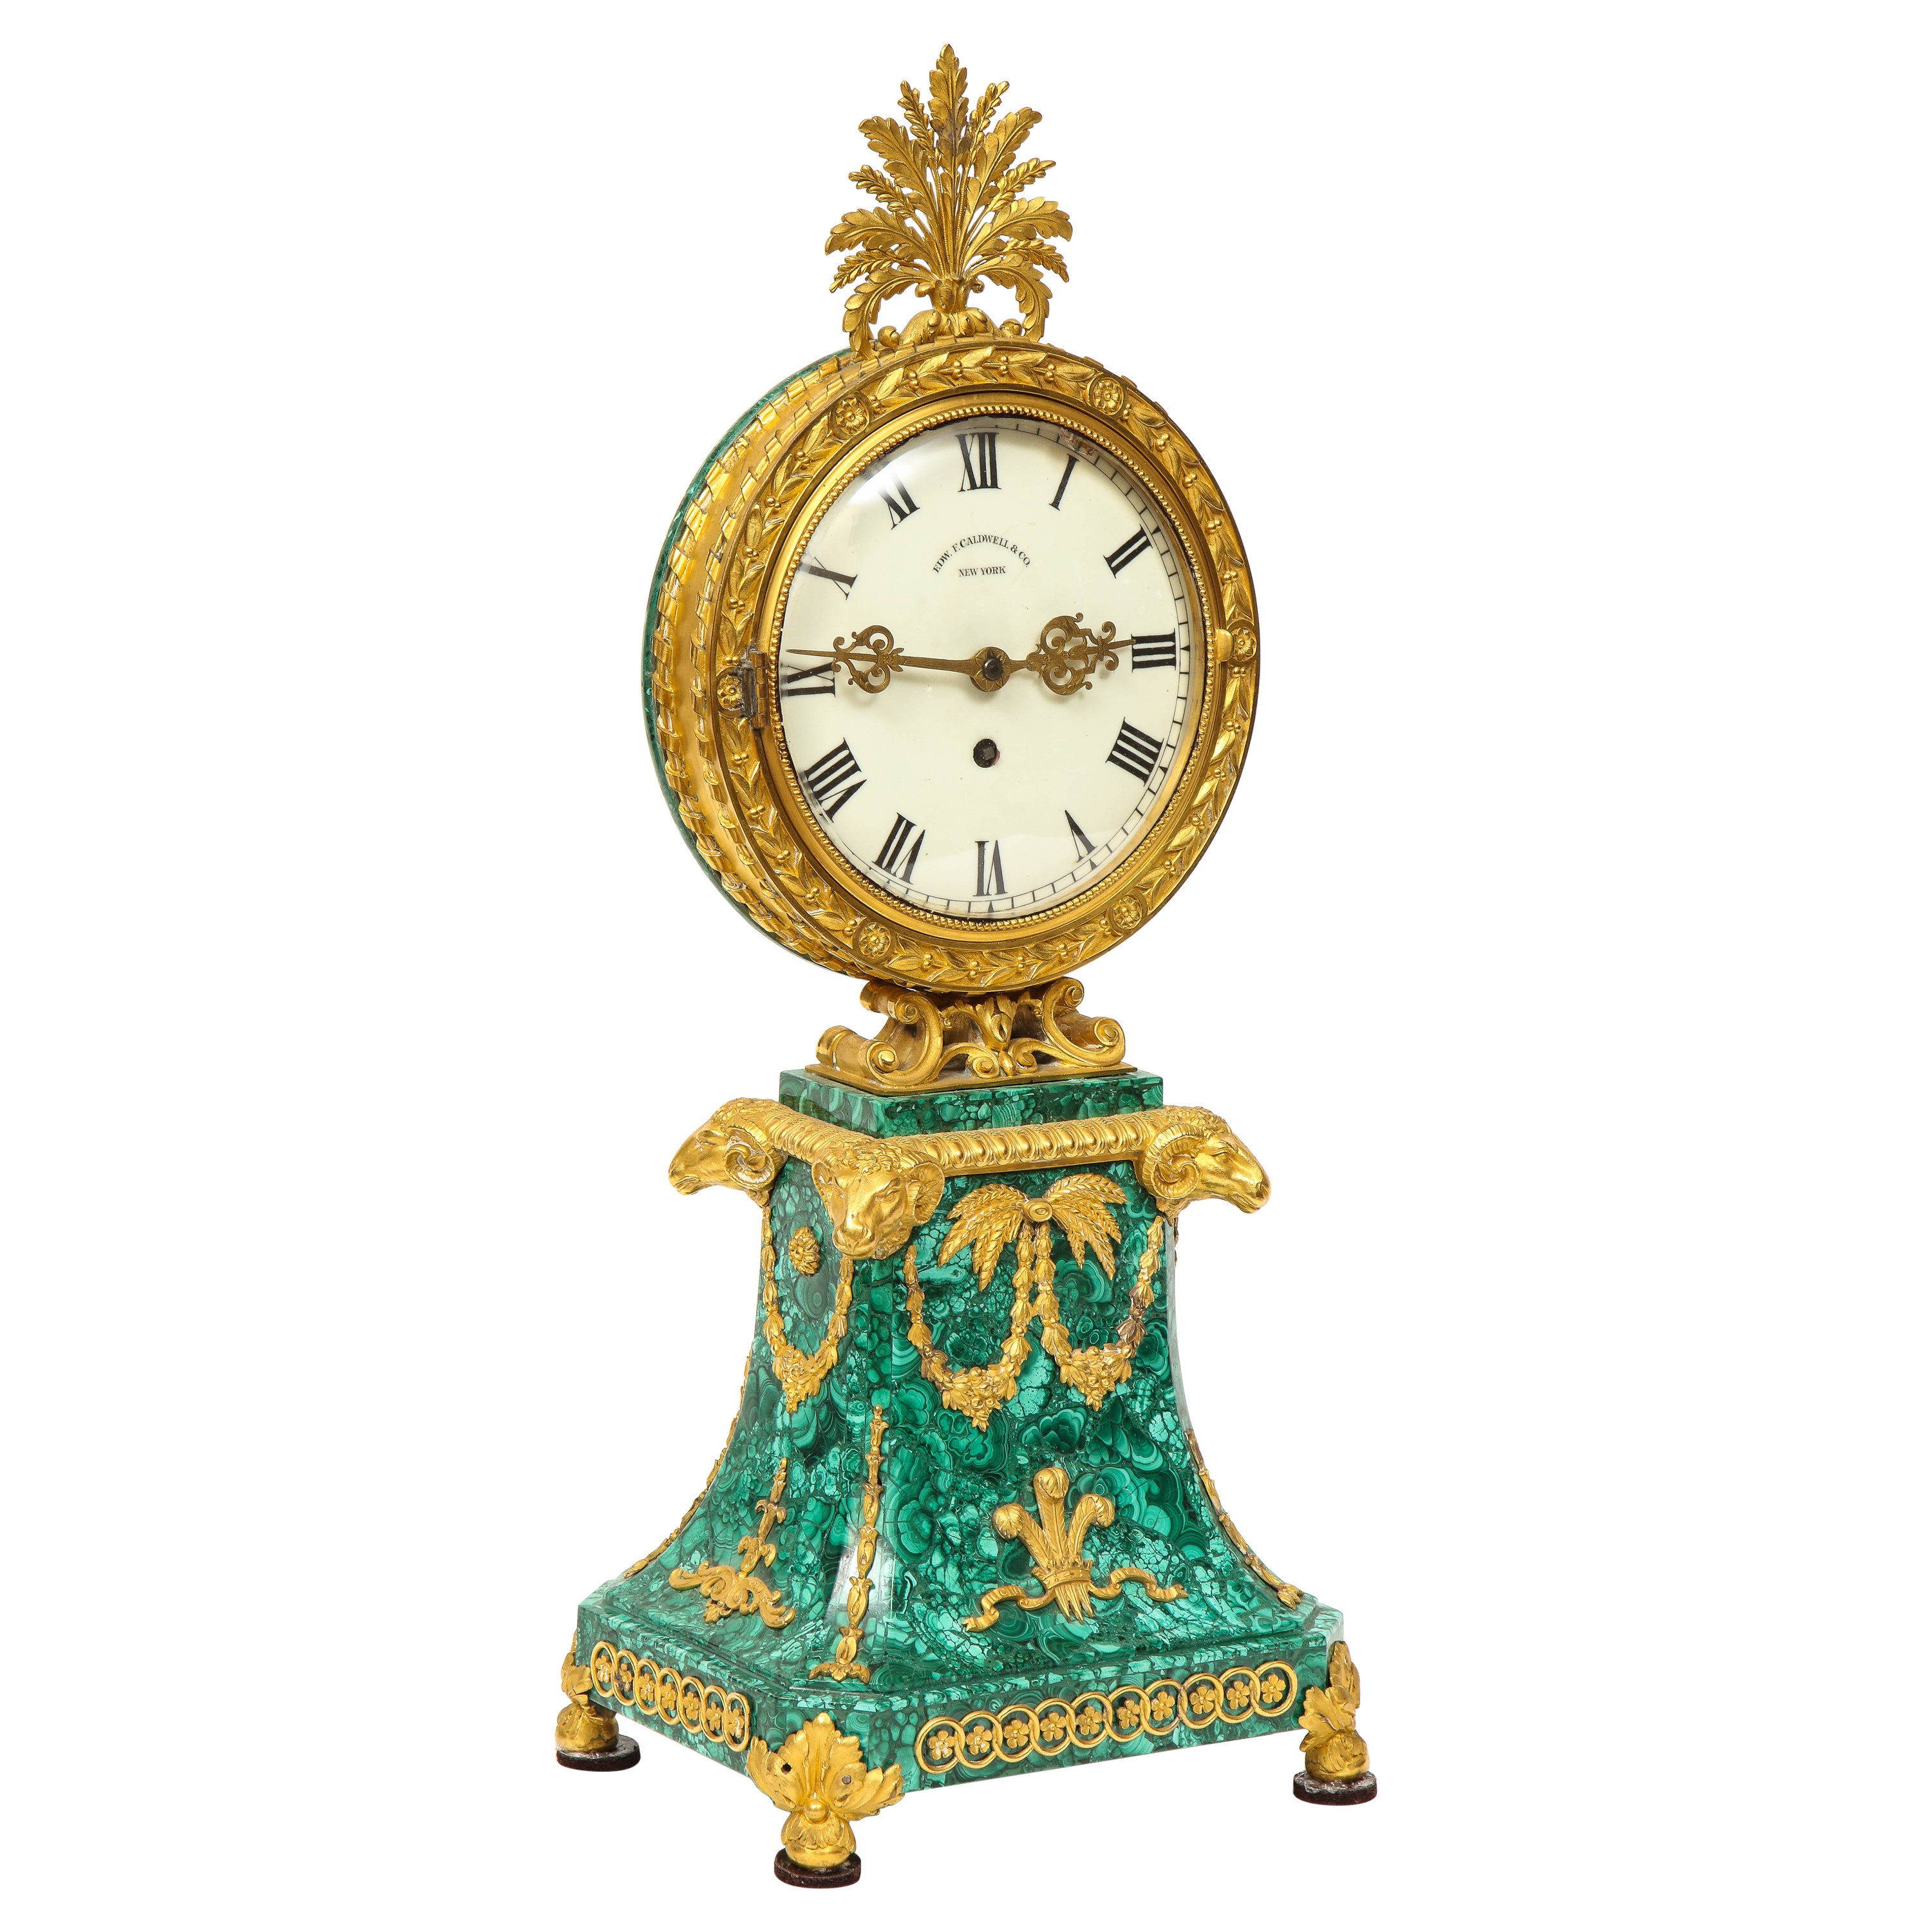 Edward F. Caldwell, An Extremely Fine and Rare Ormolu-Mounted Malachite Clock For Sale